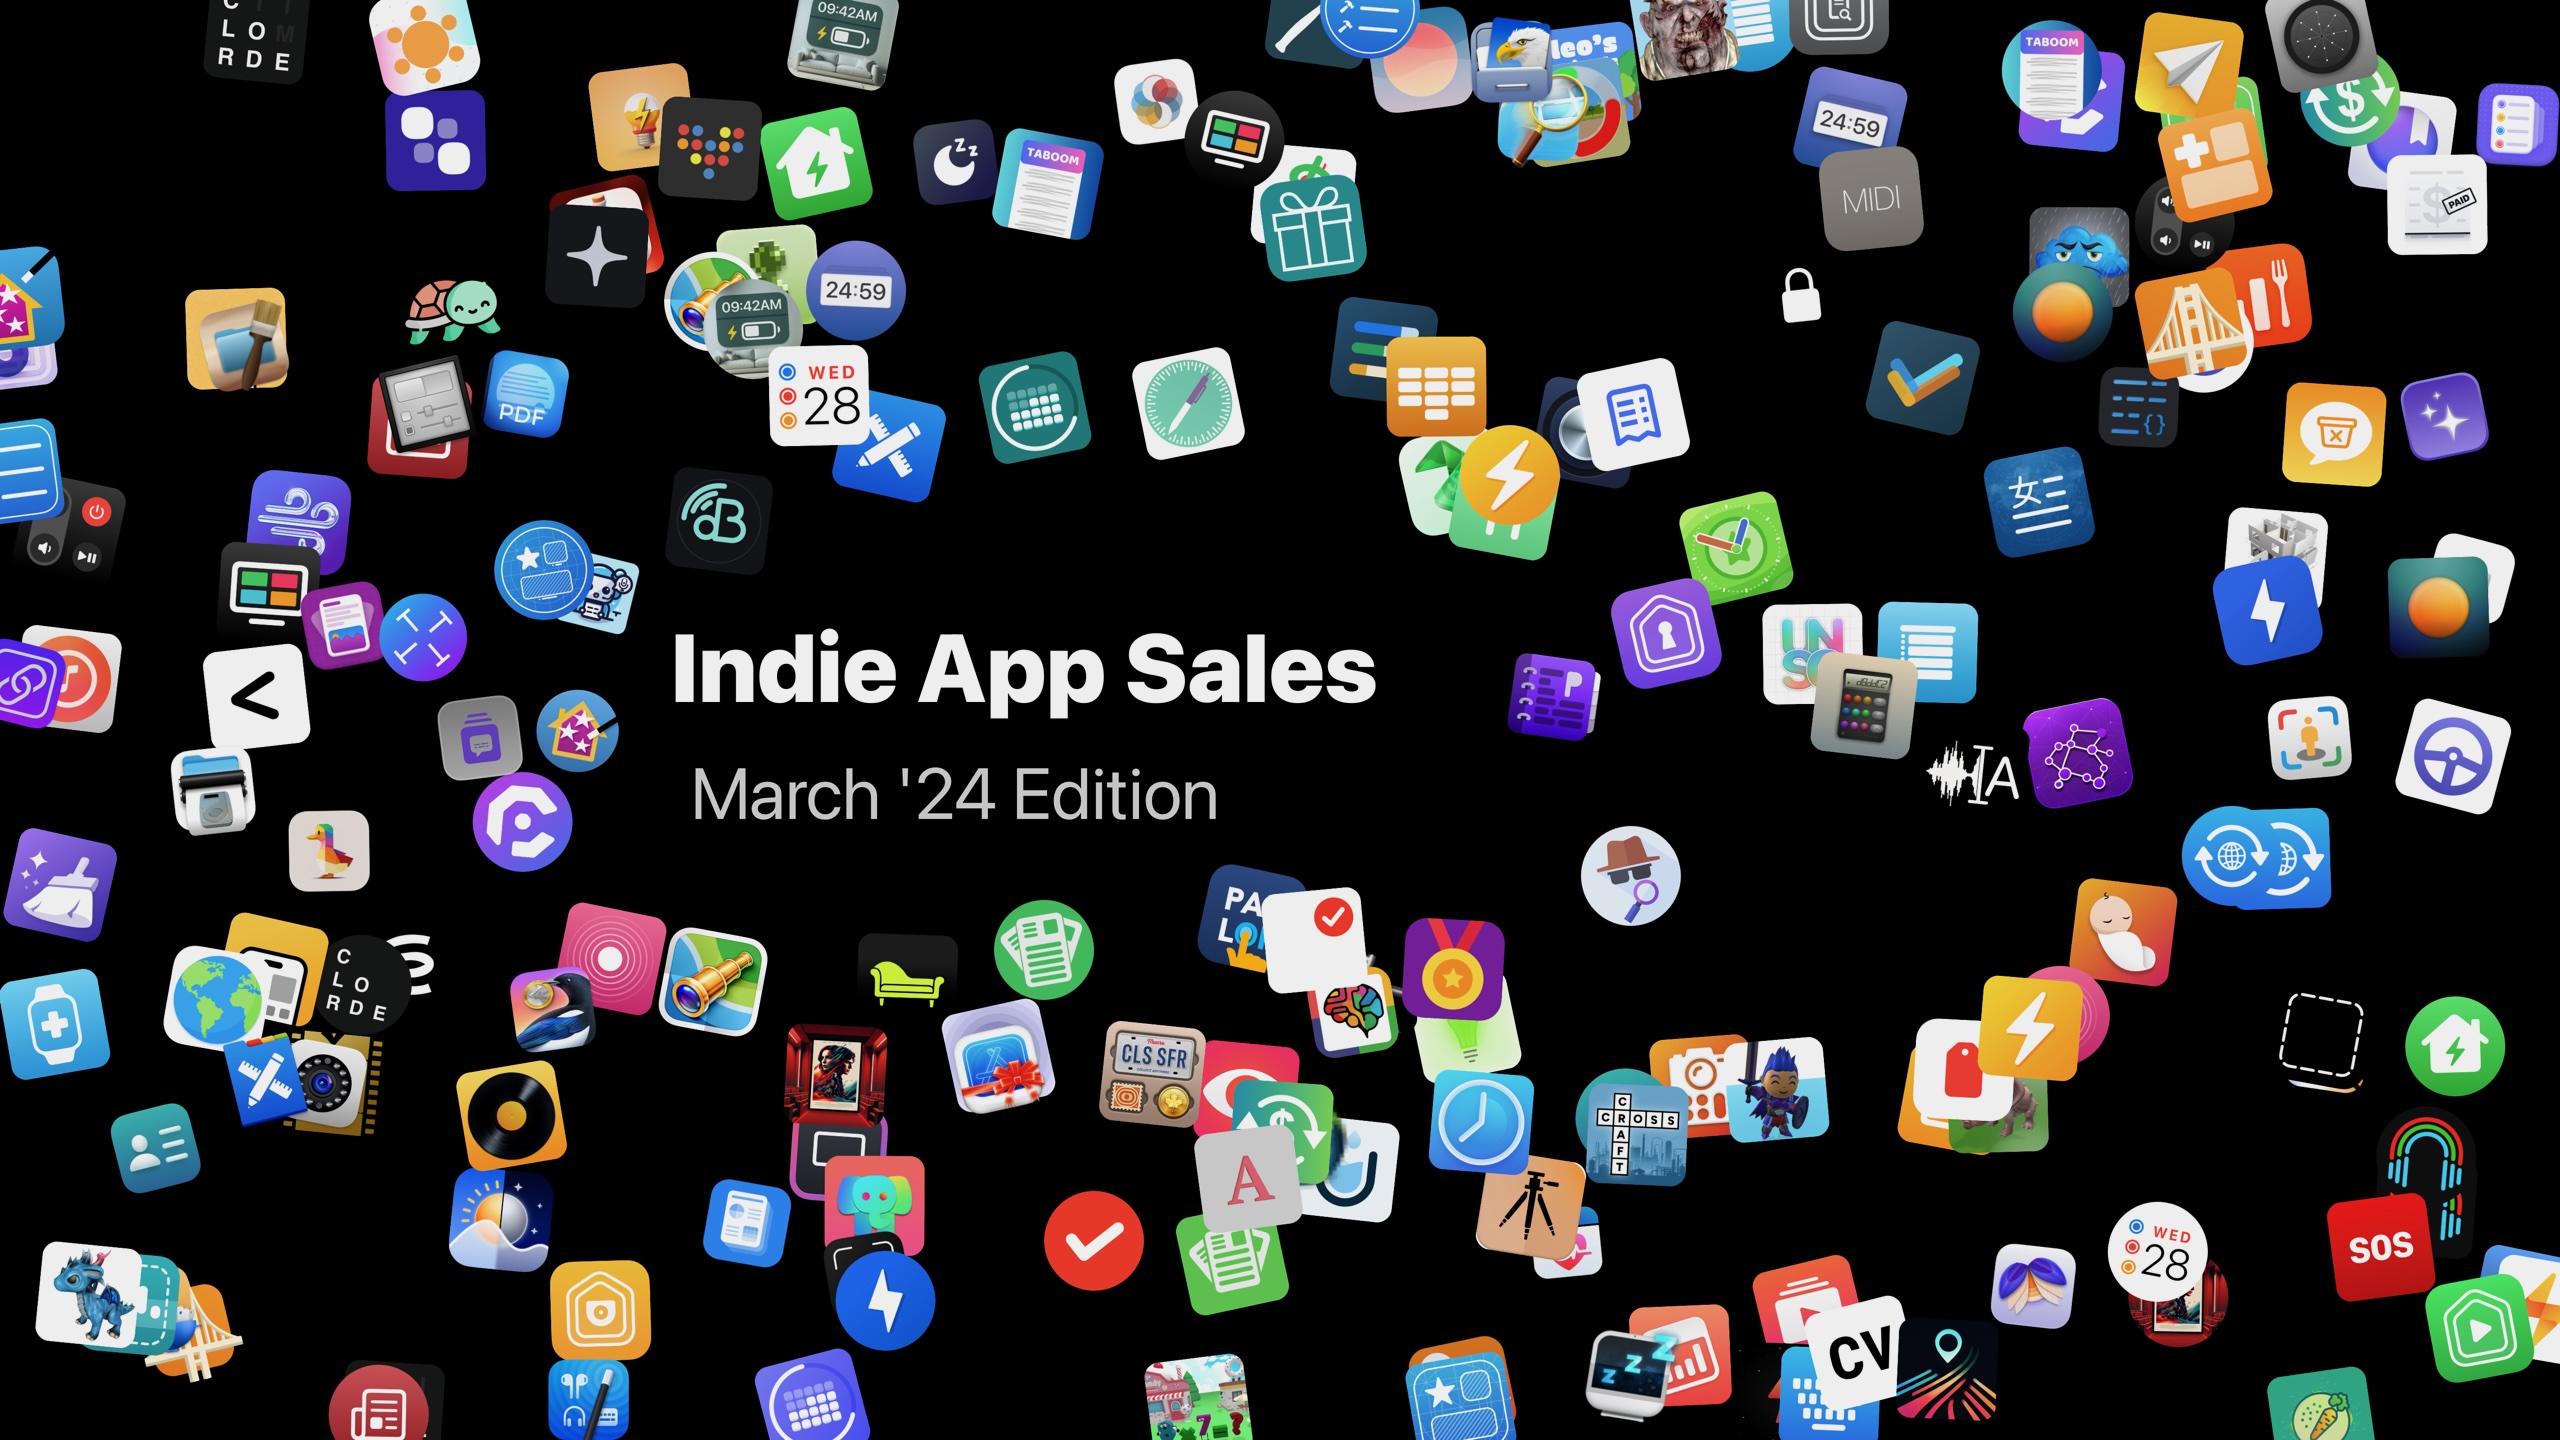 Indie App Sales event is back with great discounts on iOS and macOS apps